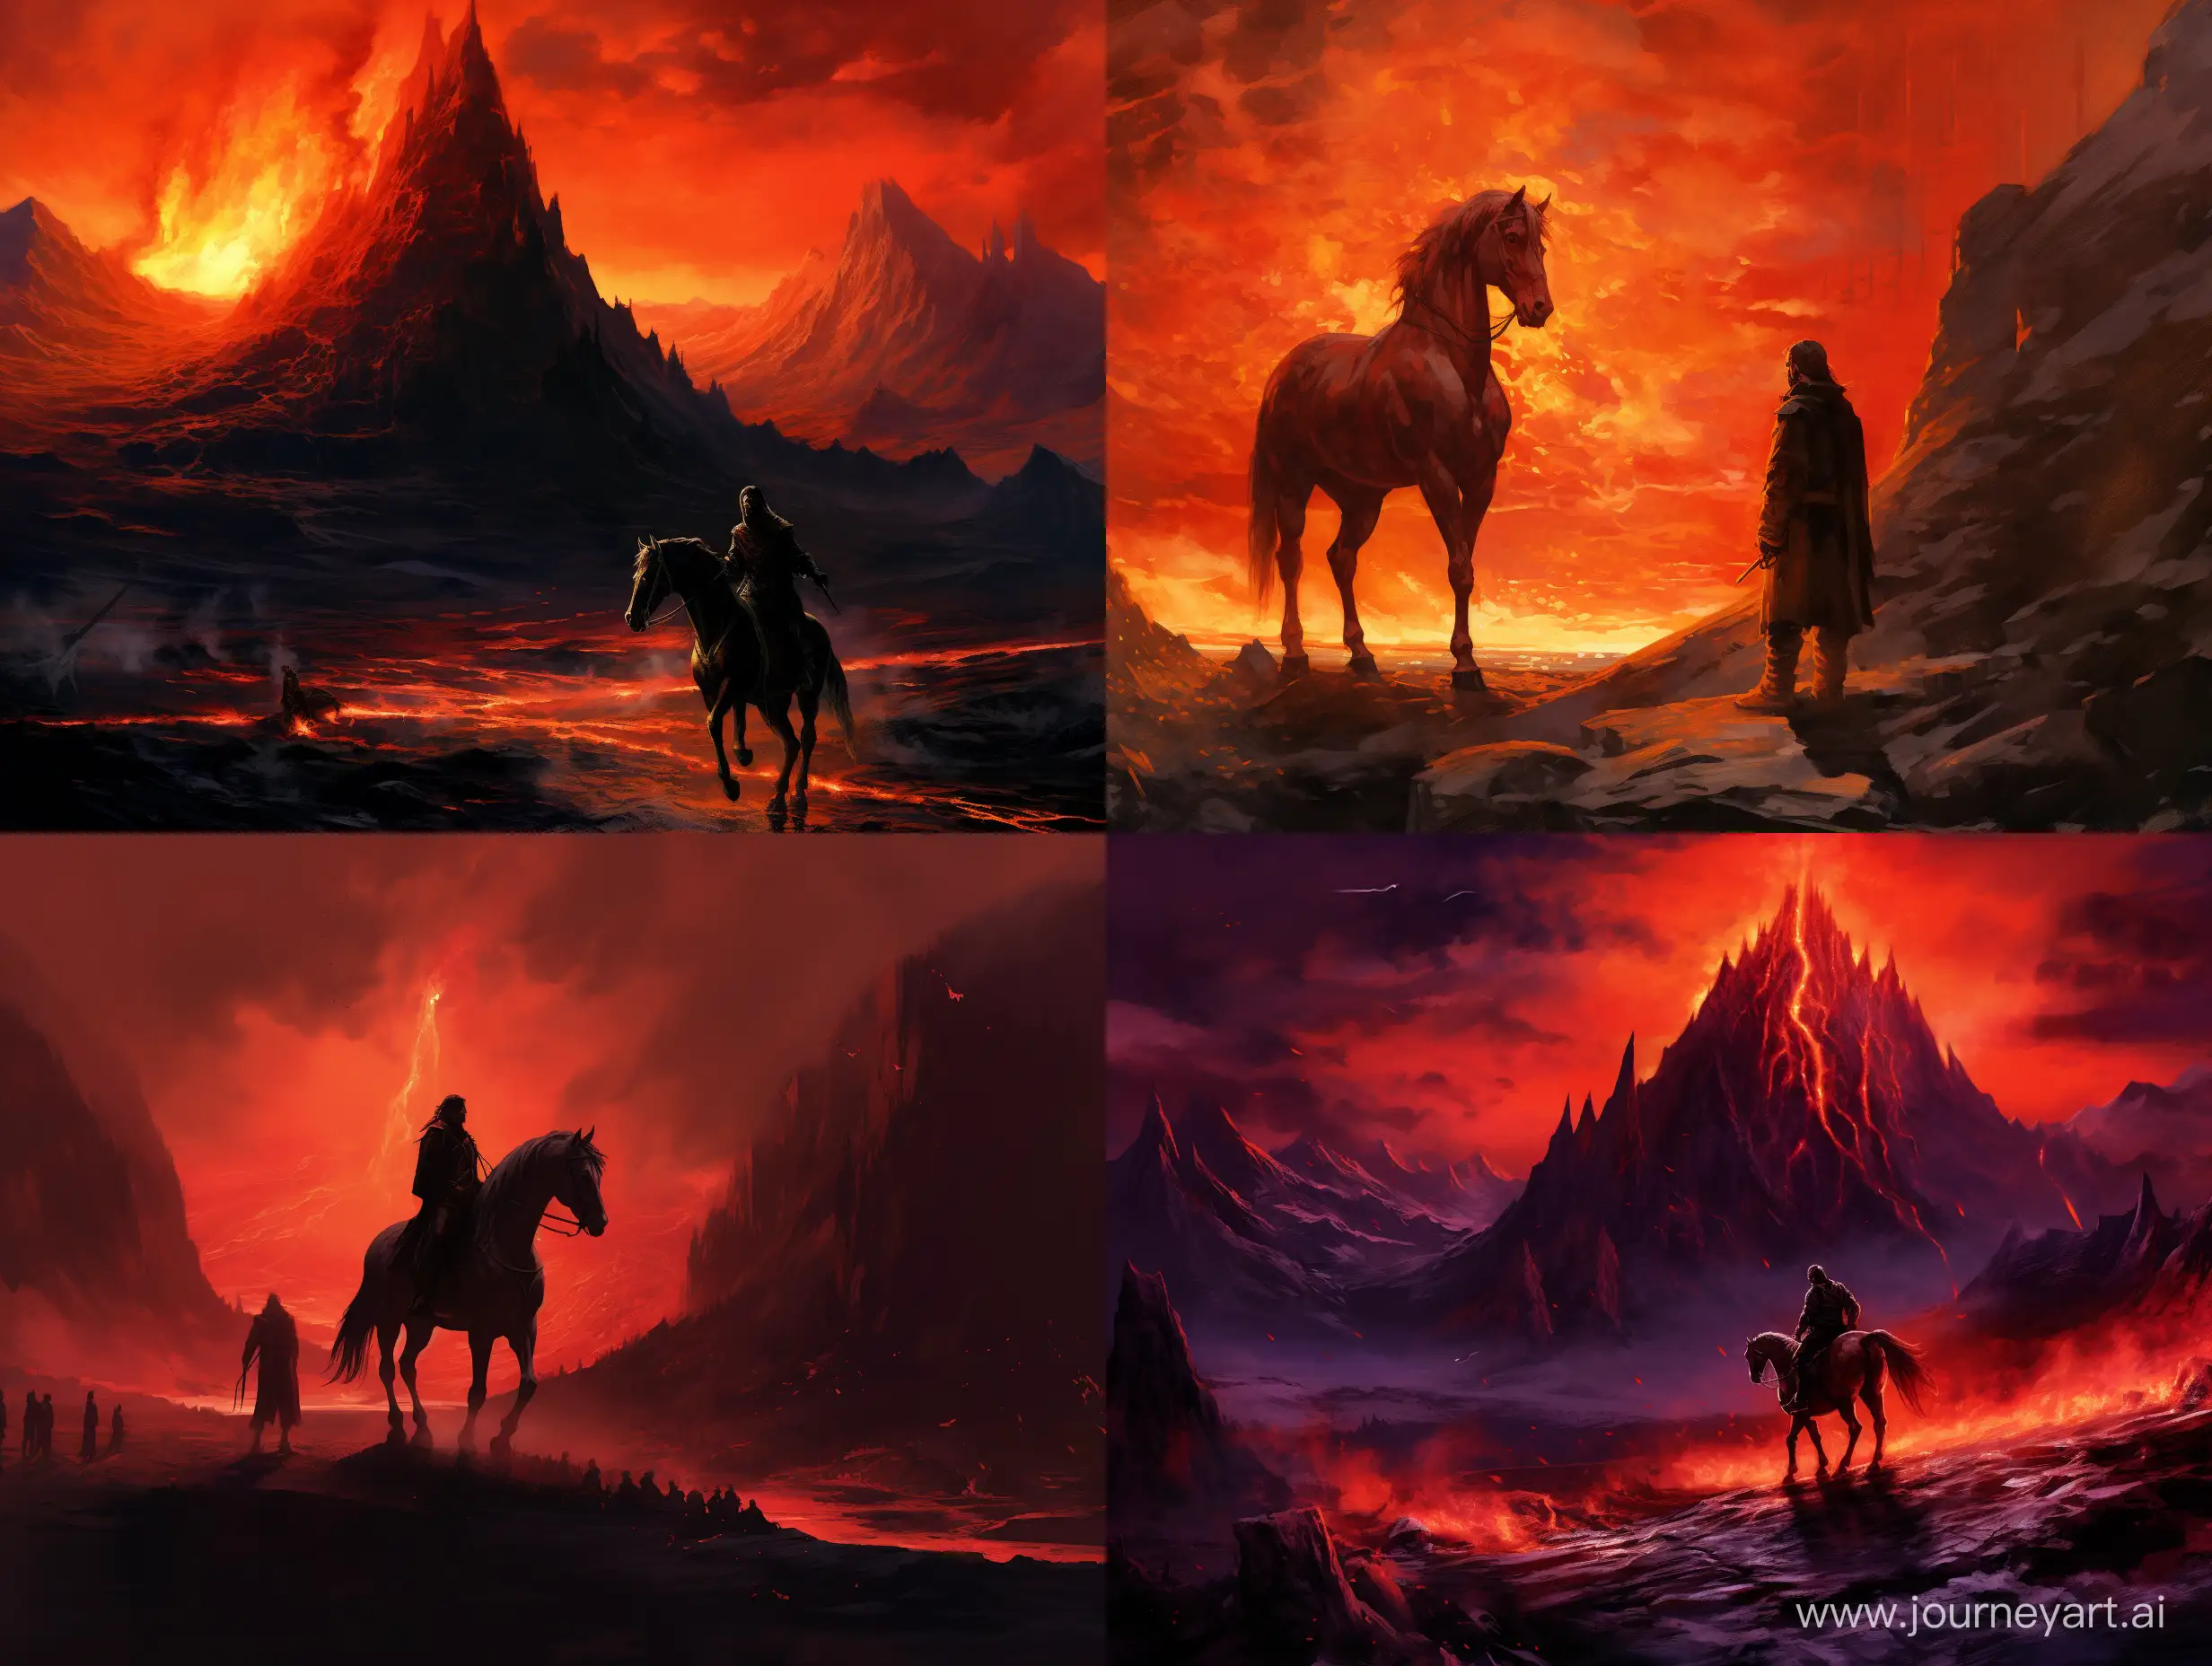 Majestic-Mountain-Summit-Enveloped-in-Flames-with-Sigurd-and-Horse